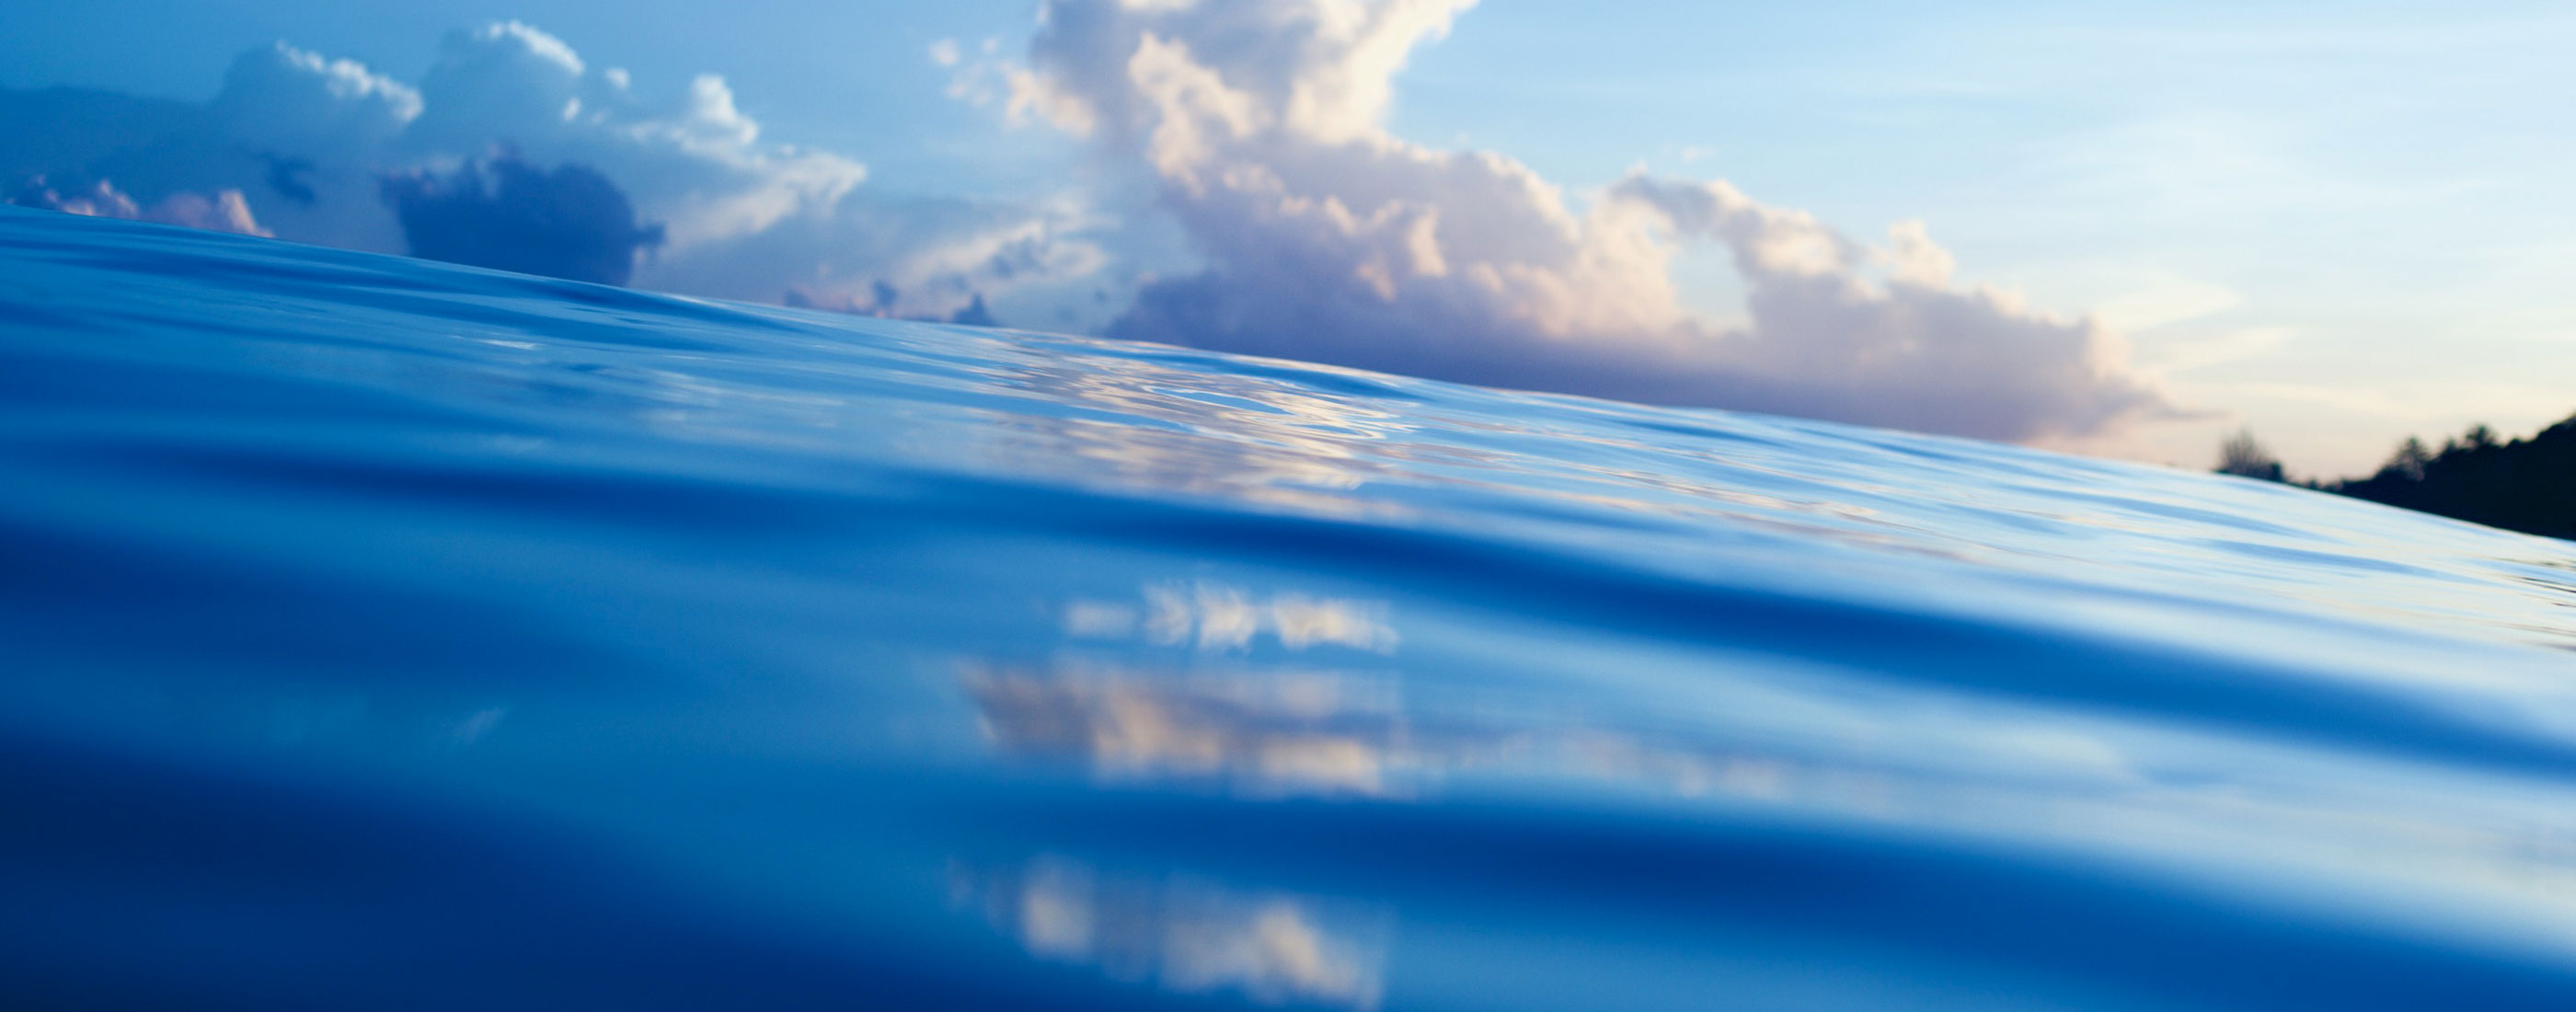 Photo of the ocean surface with large clouds above the horizon line in the background.